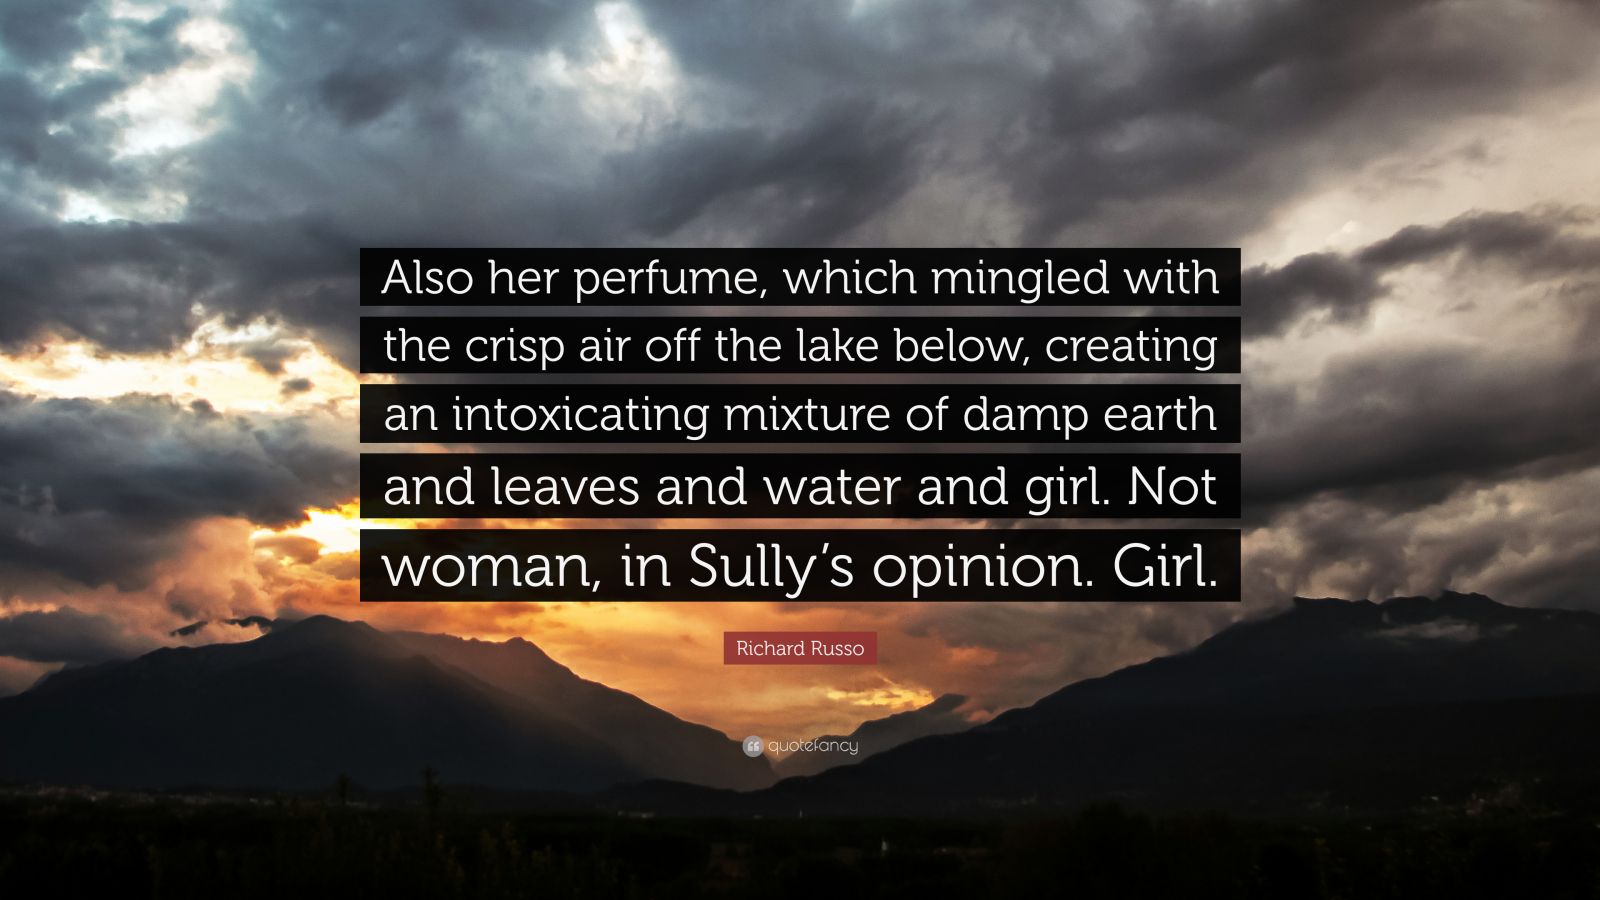 https://quotefancy.com/media/wallpaper/1600x900/6802891-Richard-Russo-Quote-Also-her-perfume-which-mingled-with-the-crisp.jpg